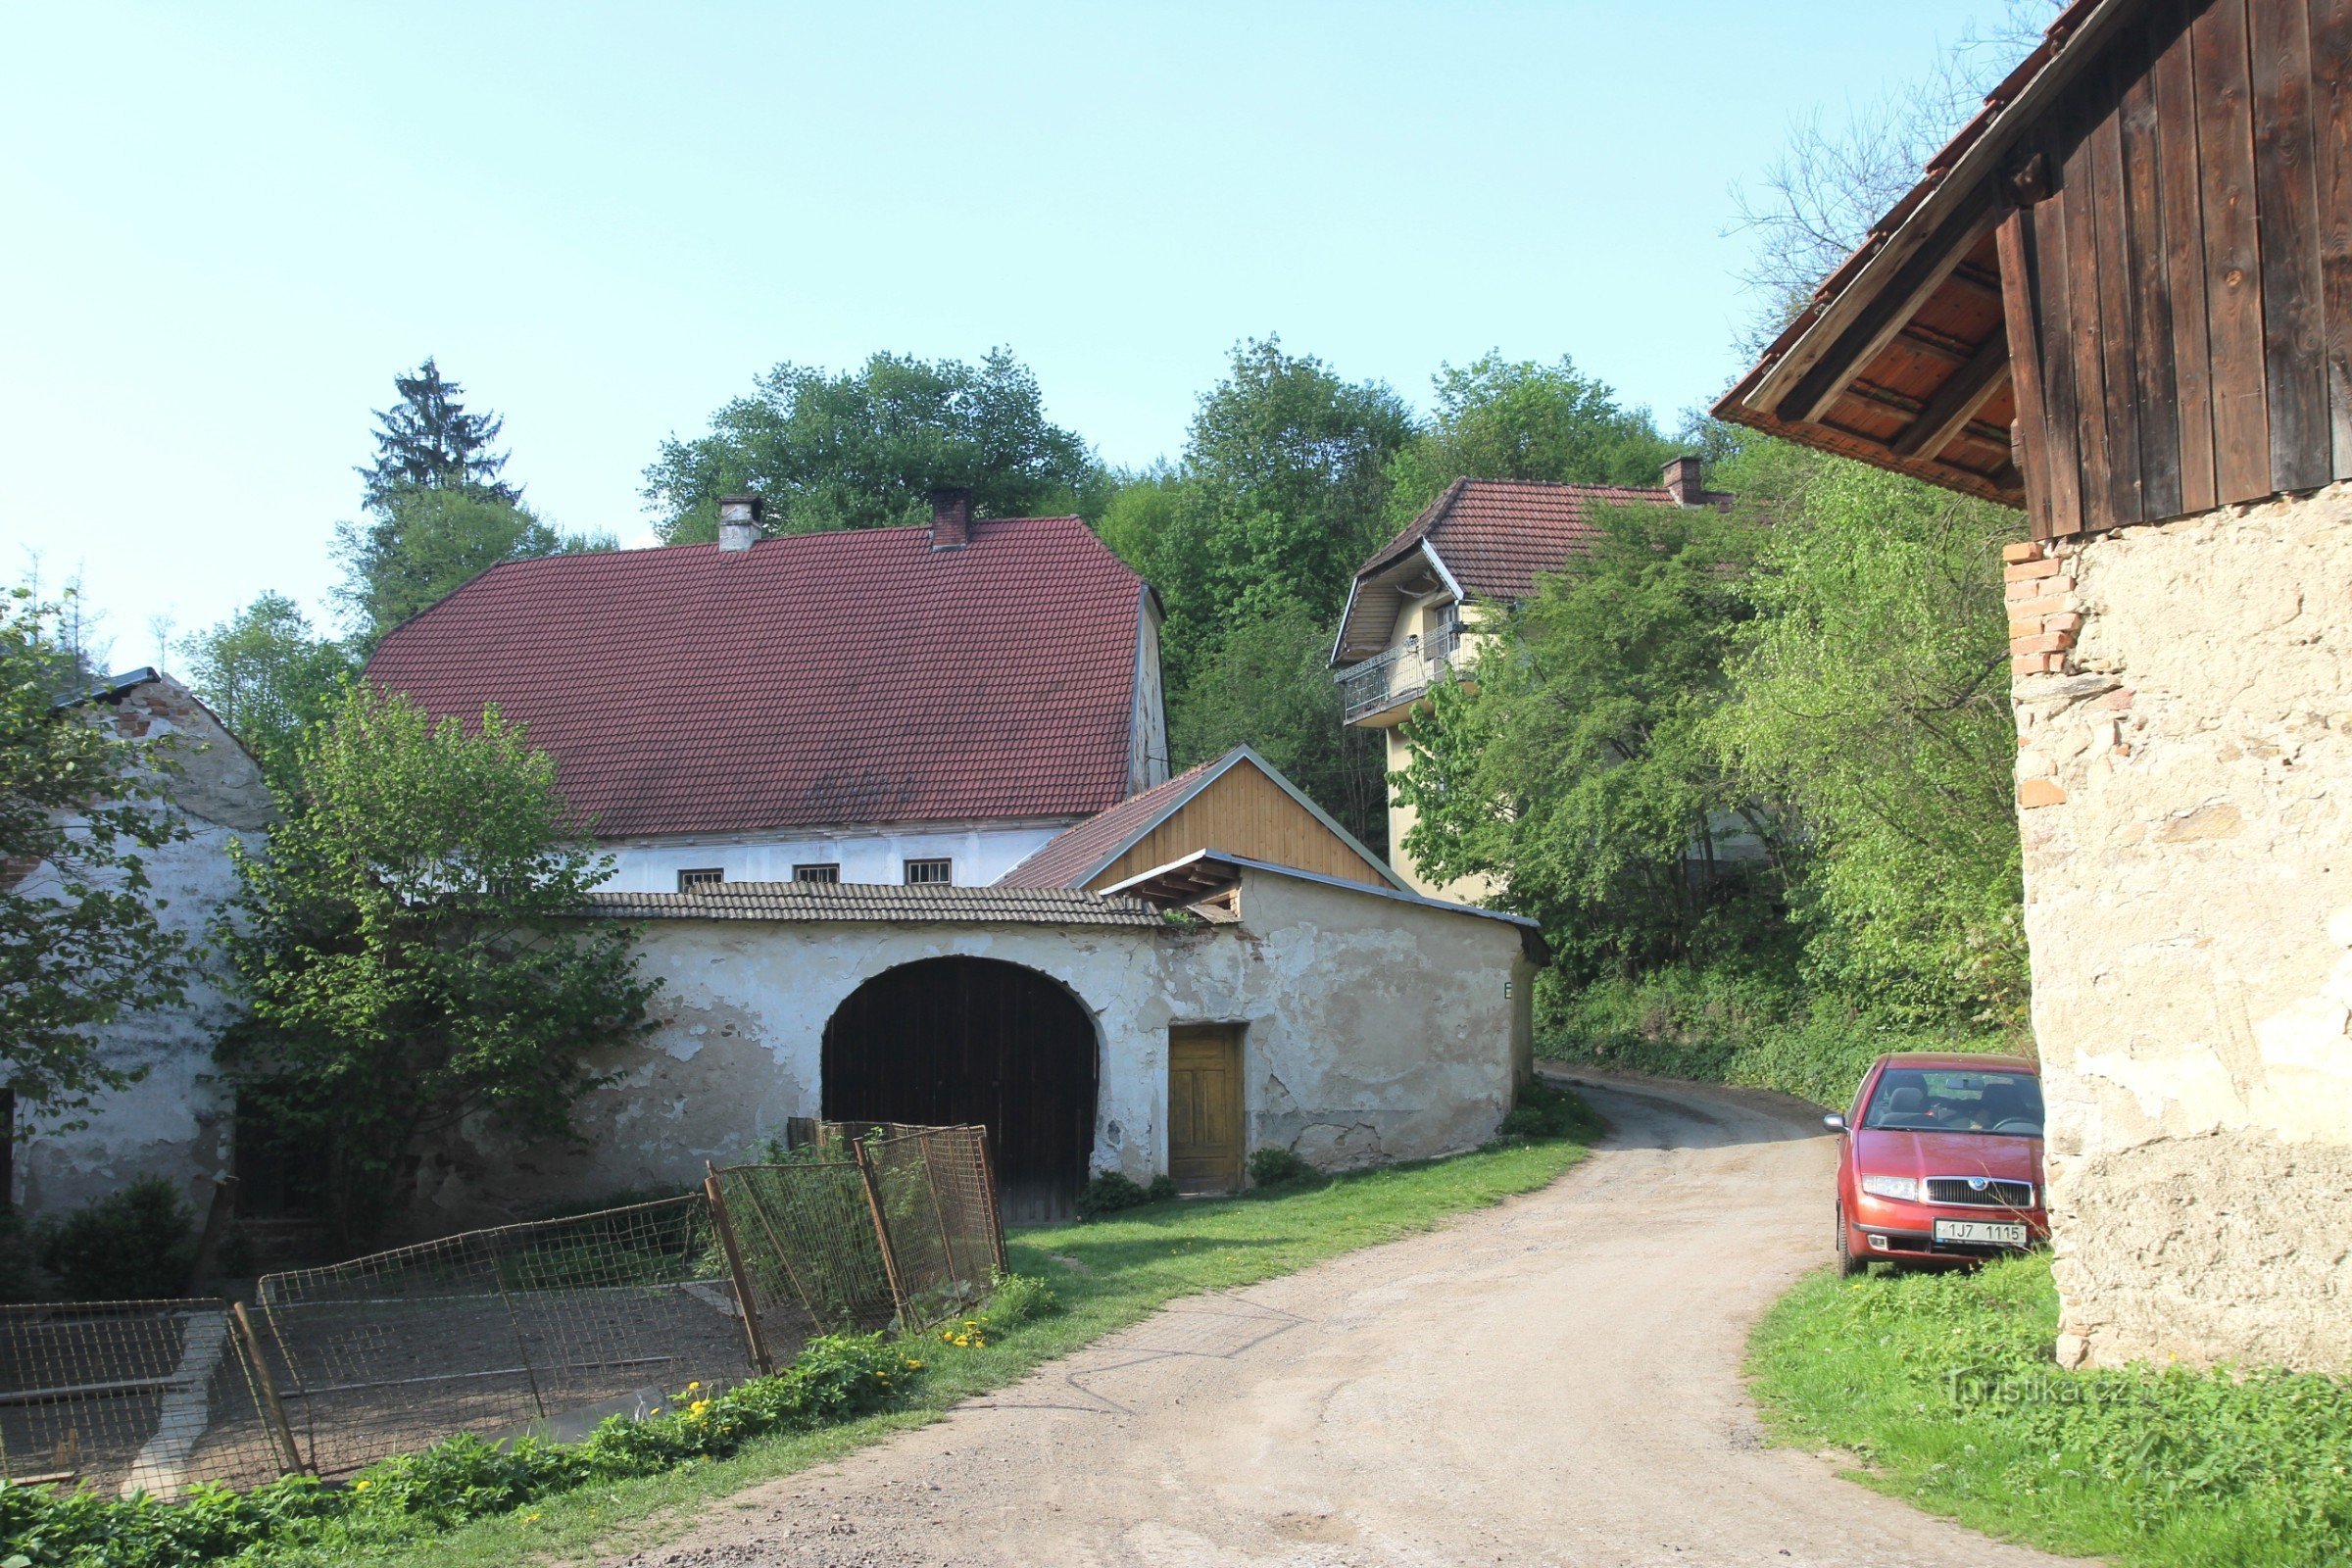 The access road to Falcovy solitude, which continues to Chytálek